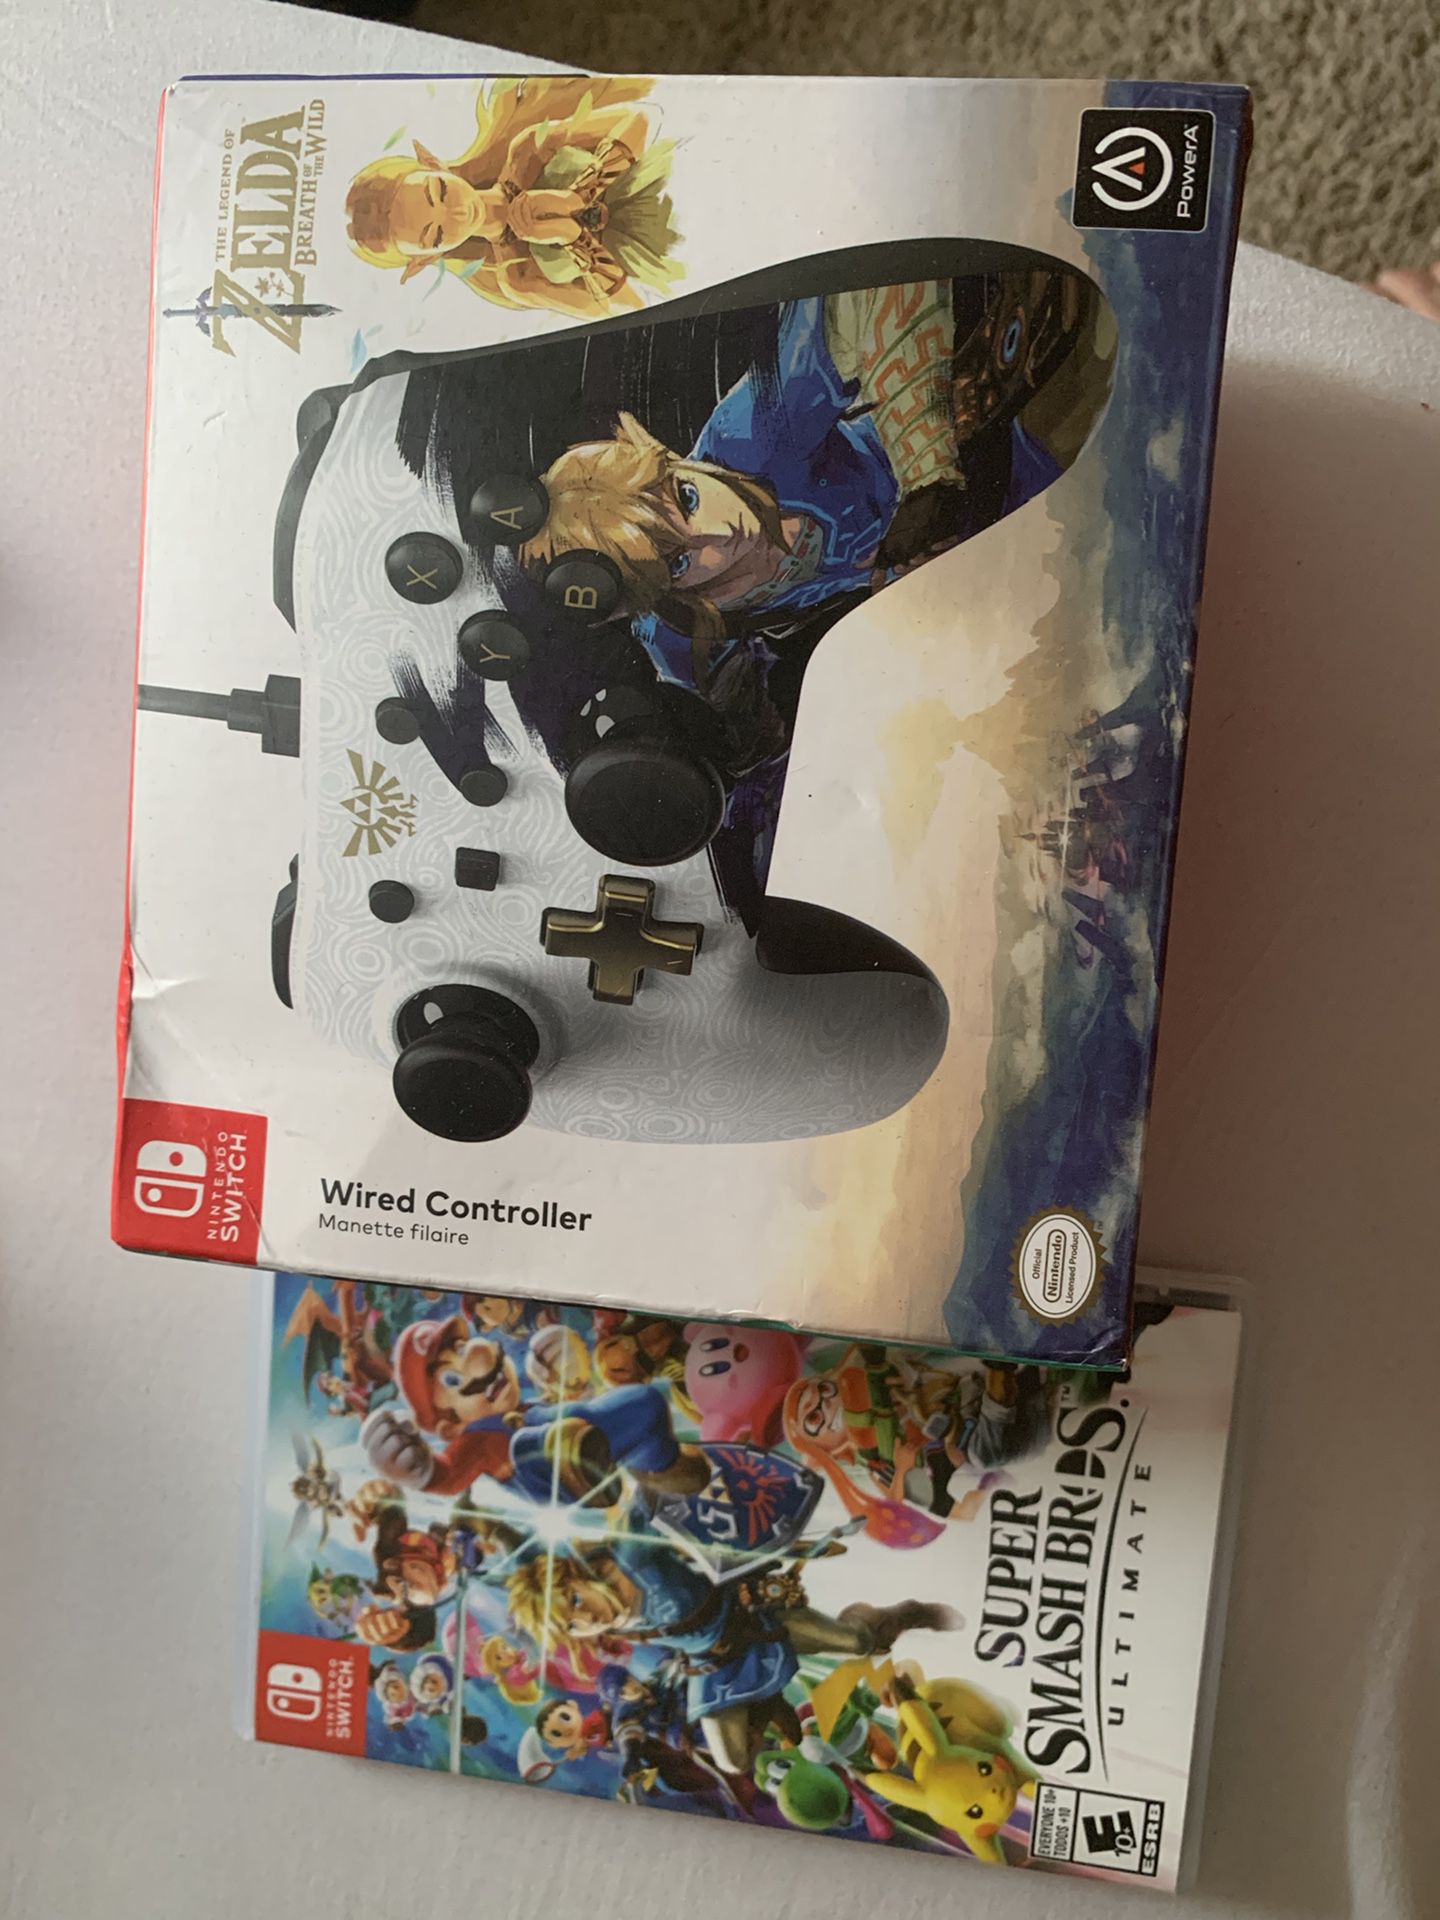 Super Smash Bros Ultimate and Wired Controller Nintendo Switch